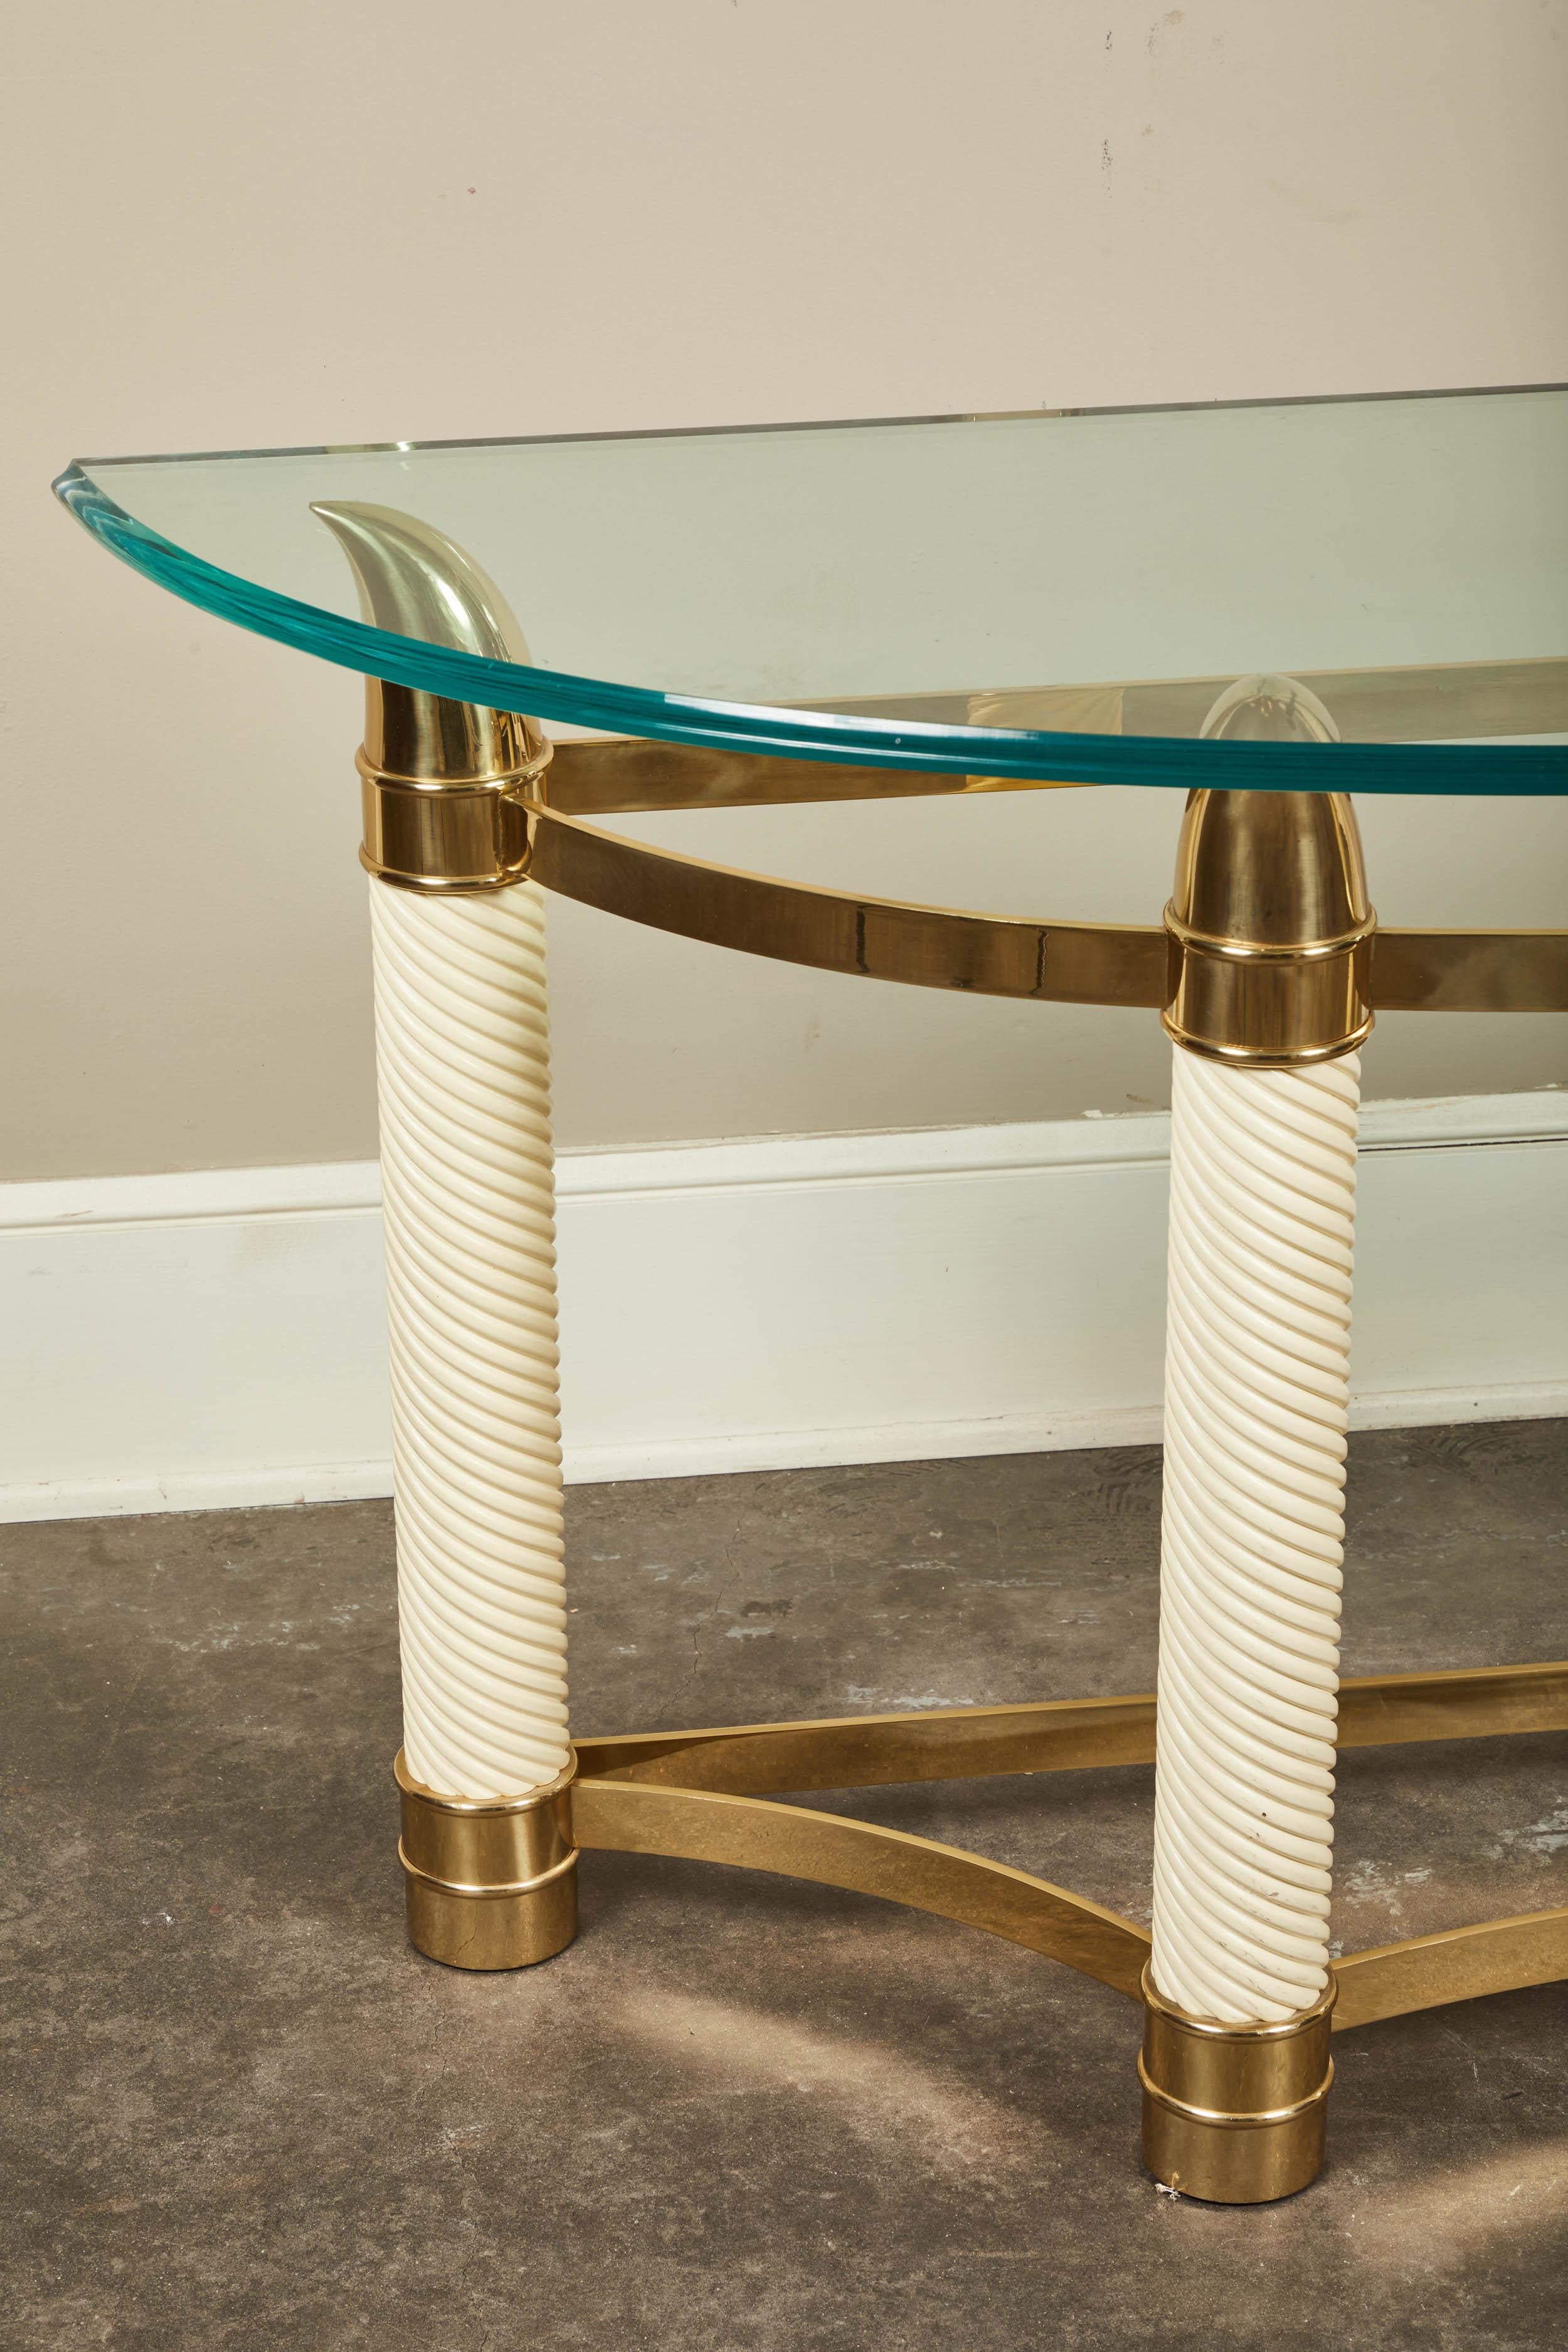 A Tommaso Barbi style faux tusk demilune console. Off-white columns with brass detailing on either end. Glass top gently floats on the spear ends of the faux tusk legs.